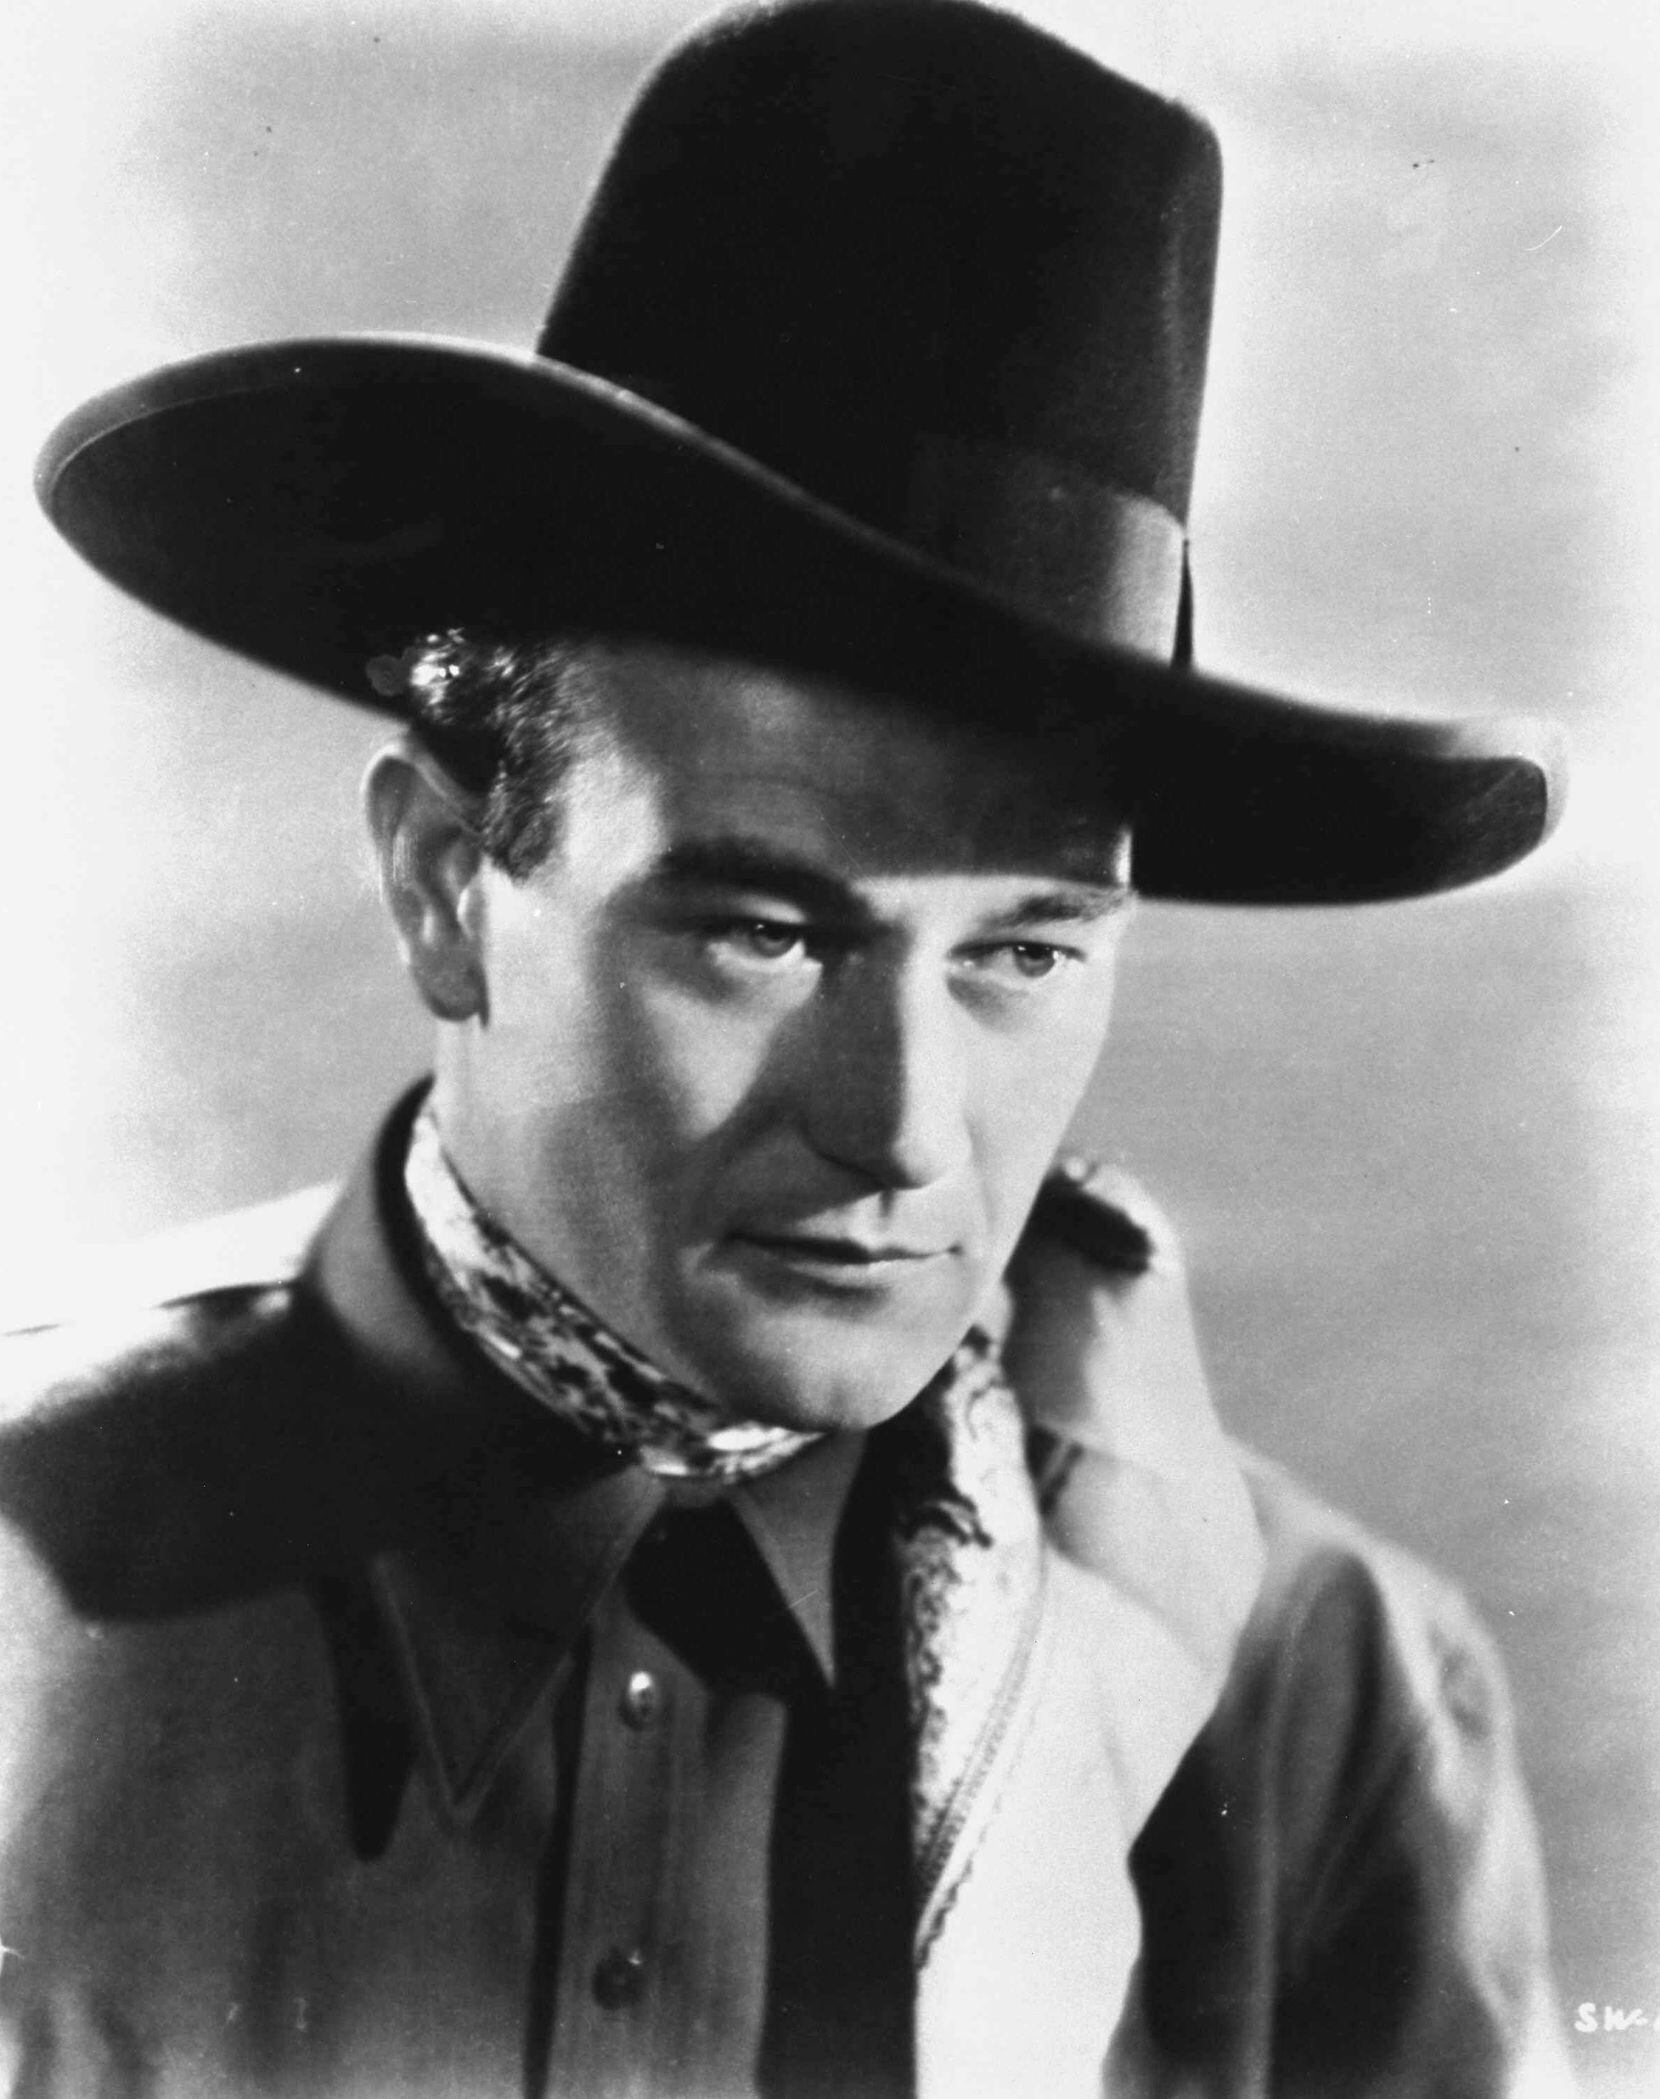 John Wayne made about 200 movies, and he was usually paid handsomely. But he didn't watch...